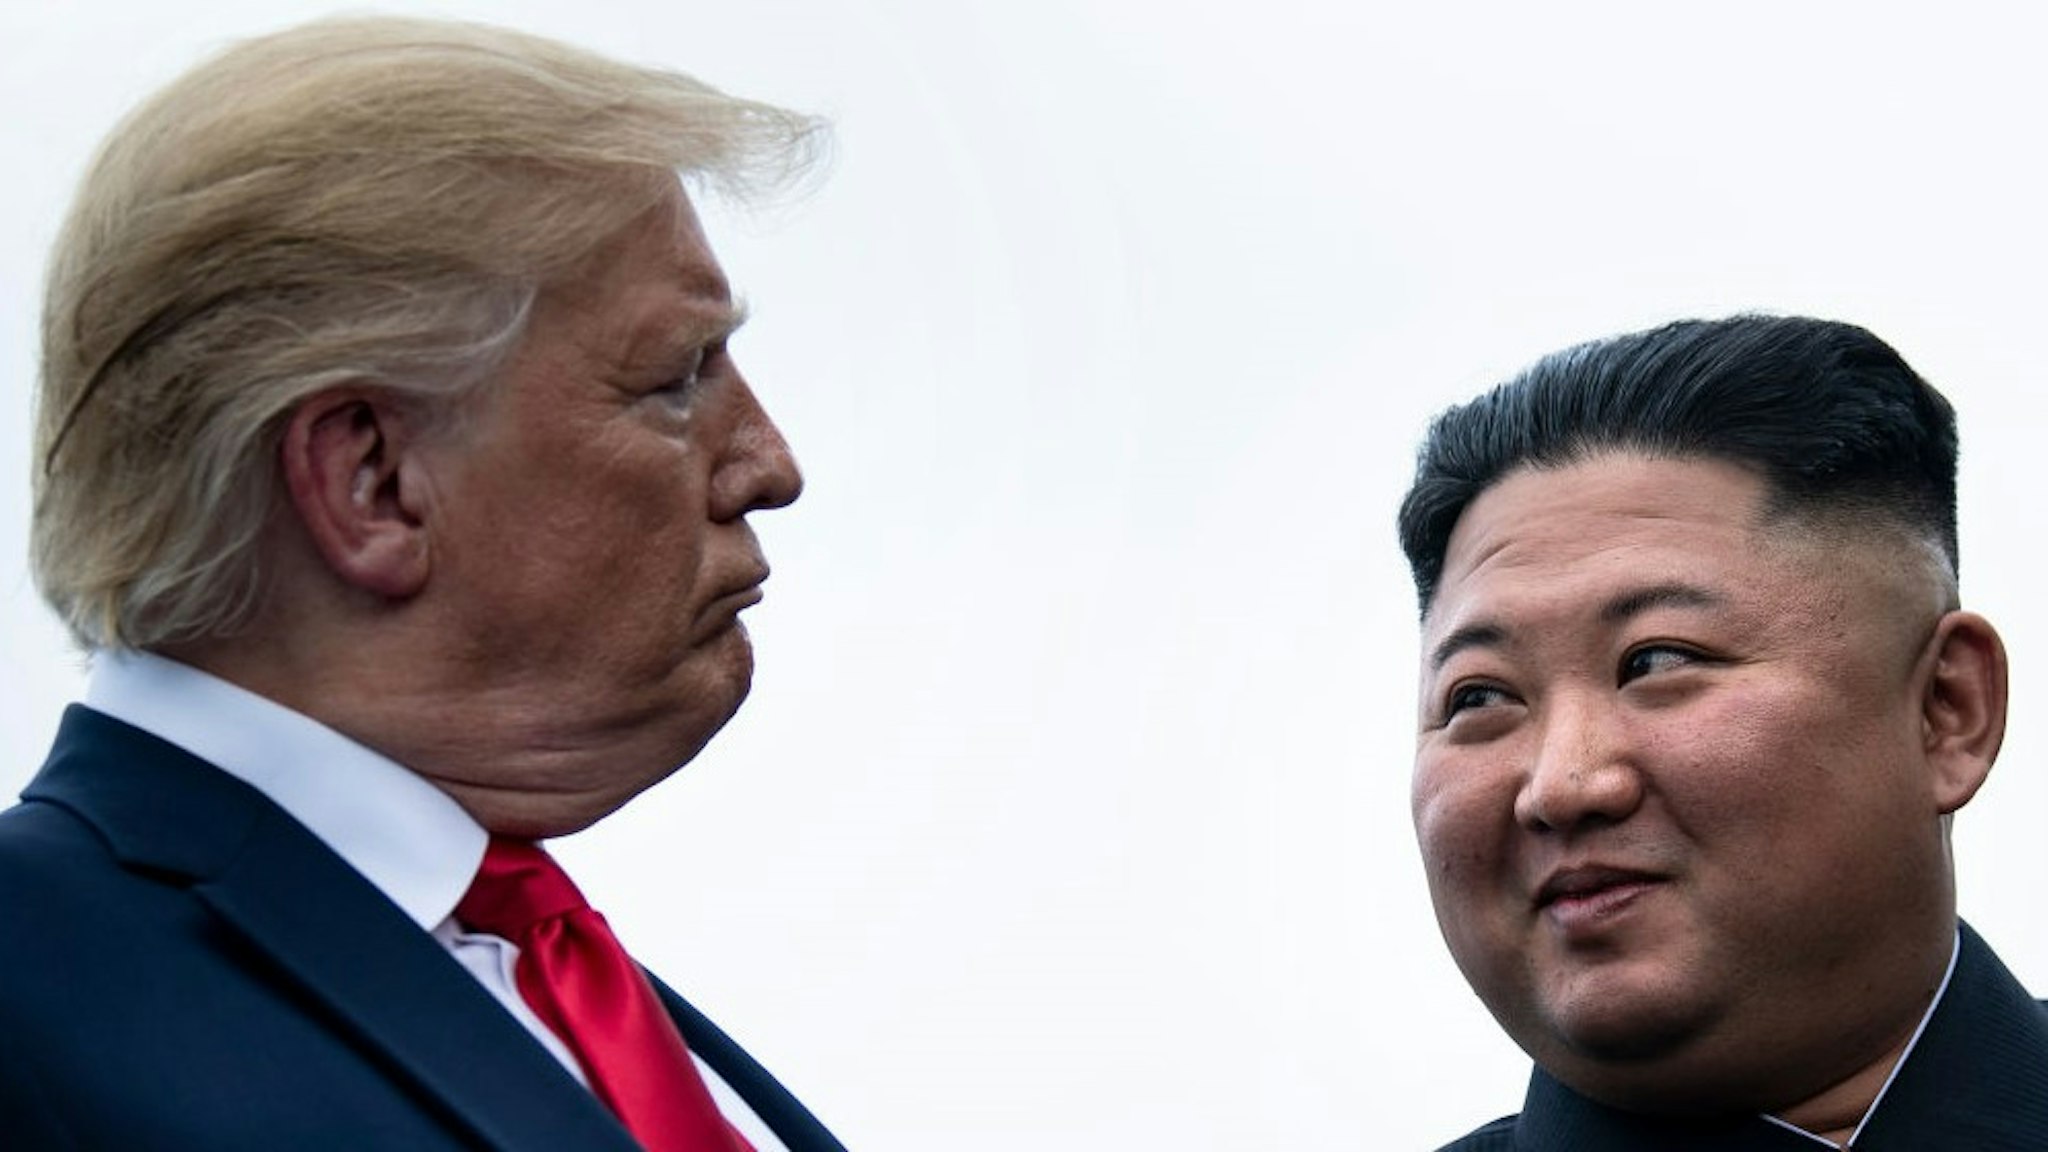 US President Donald Trump and North Korea's leader Kim Jong-un talk before a meeting in the Demilitarized Zone(DMZ) on June 30, 2019, in Panmunjom, Korea. (Photo by Brendan Smialowski / AFP) (Photo credit should read